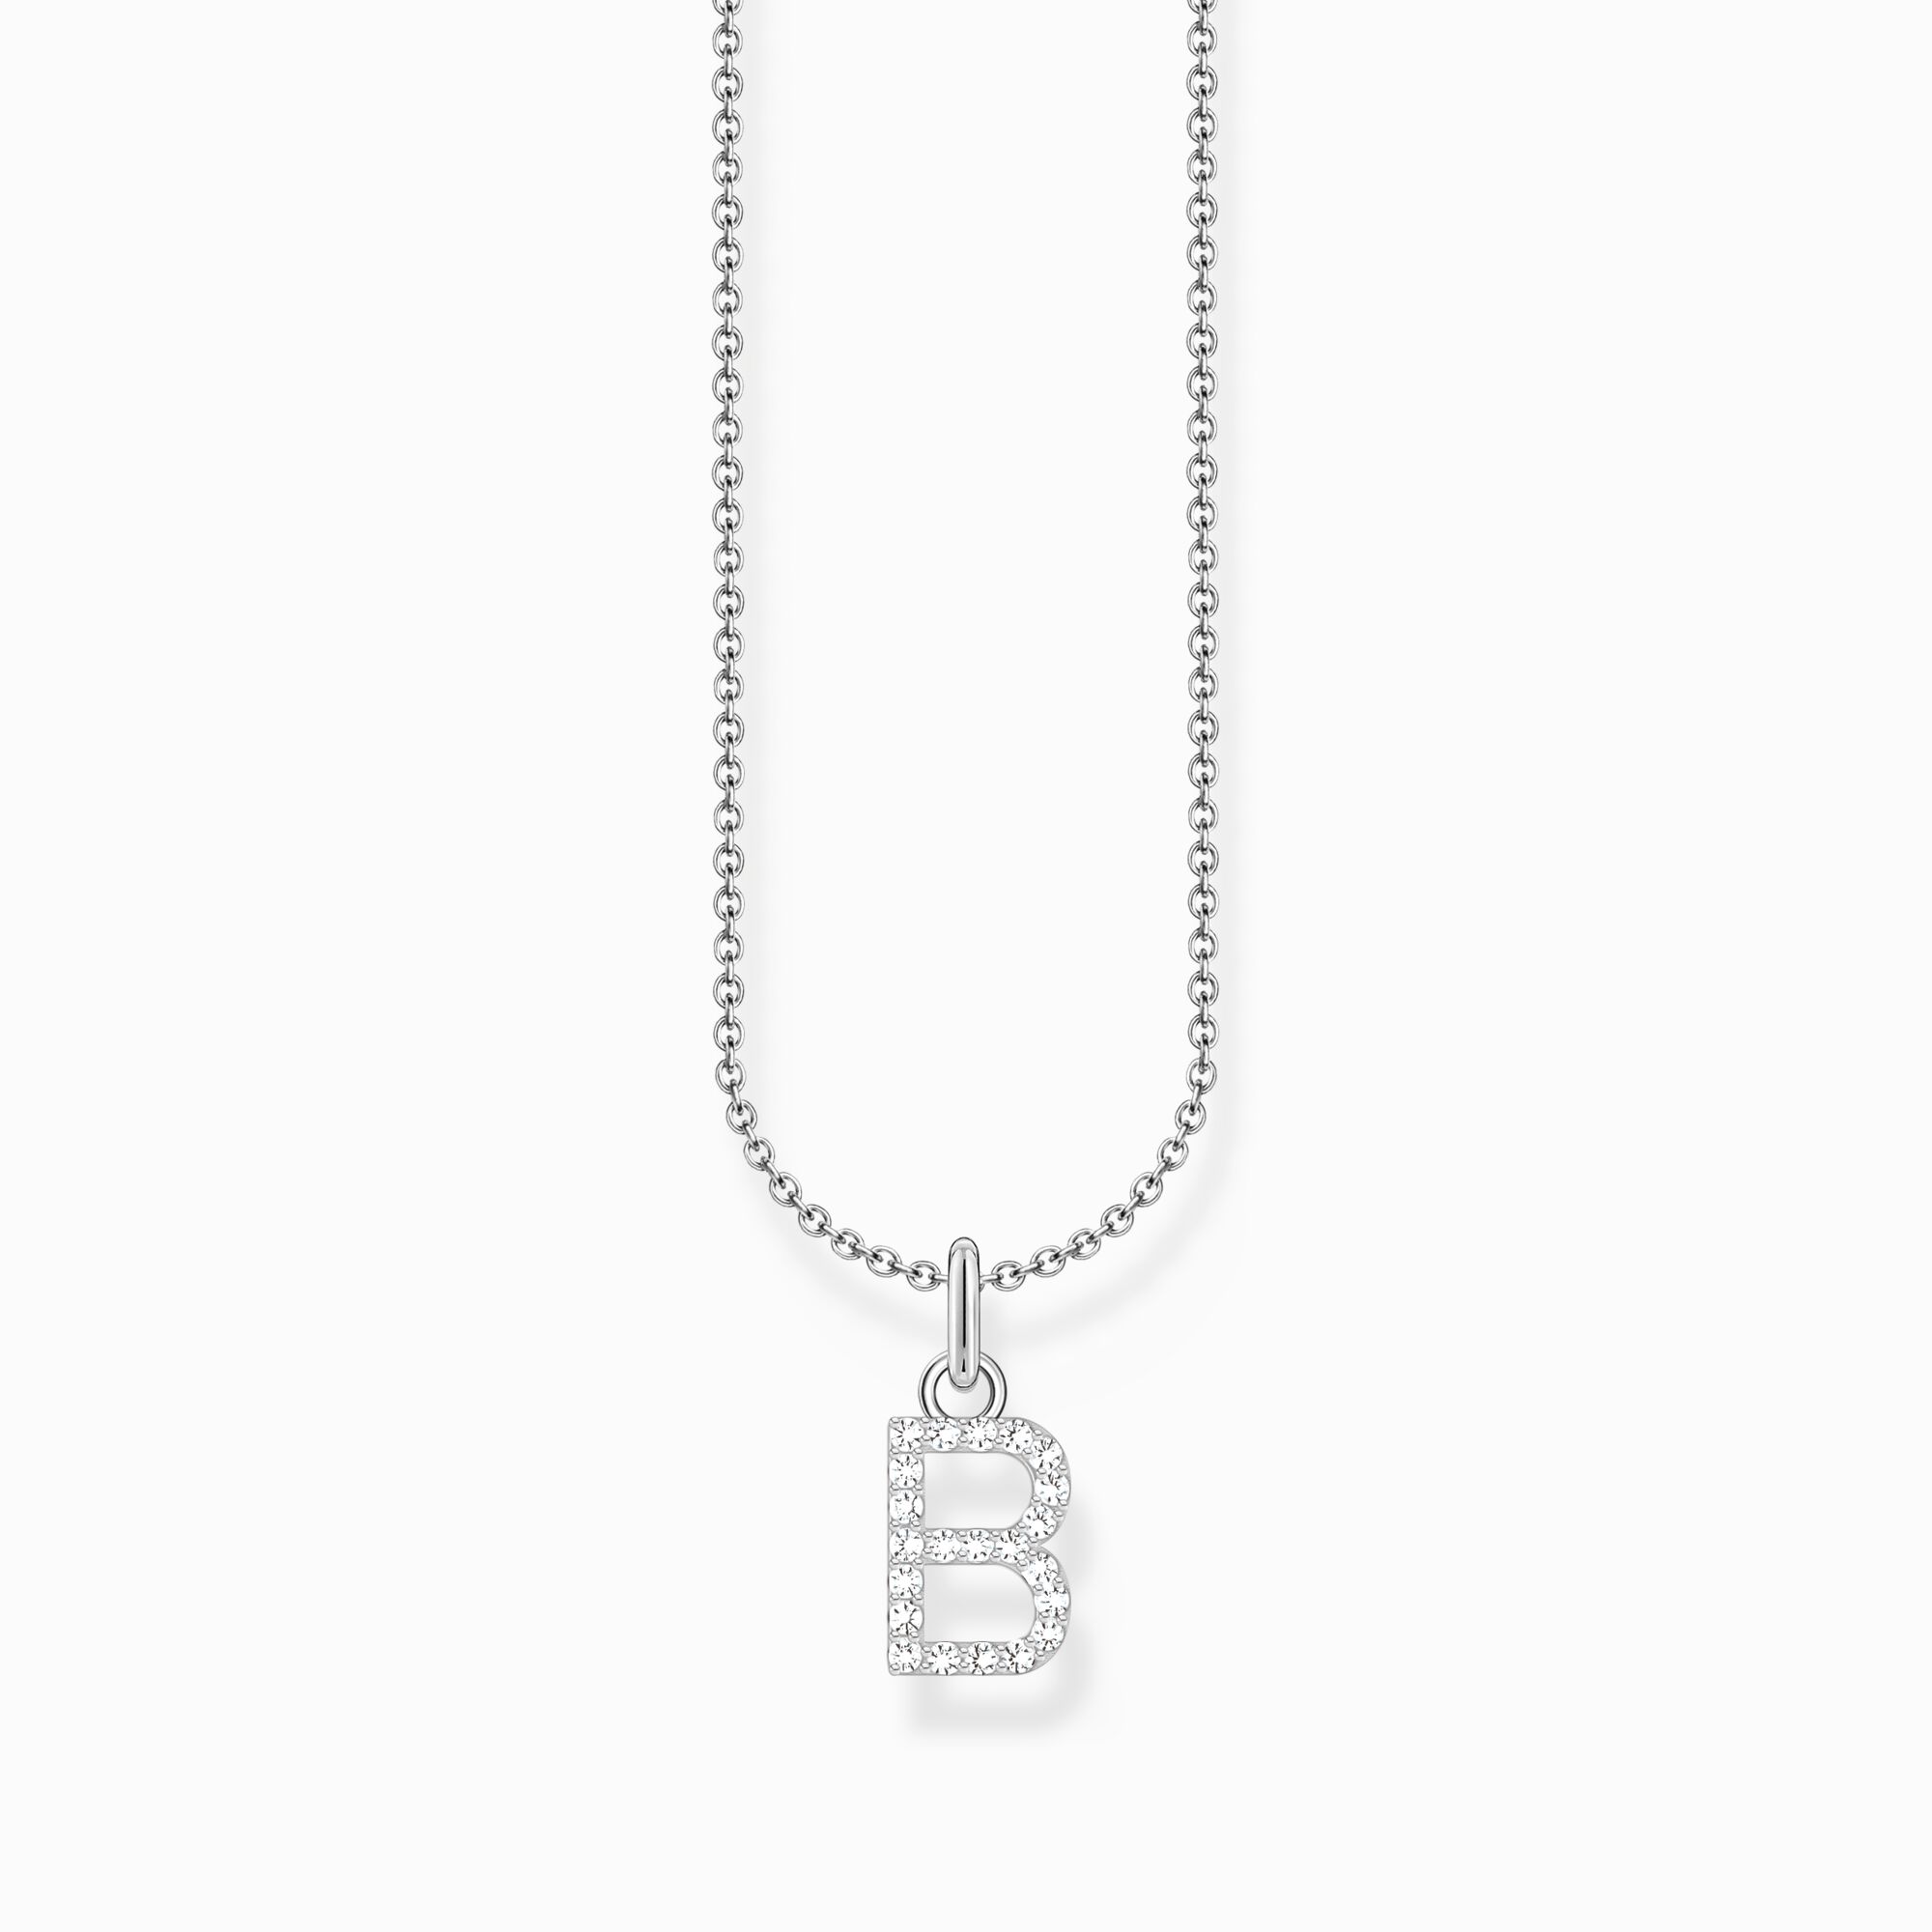 Silver necklace with letter pendant B and white zirconia from the Charming Collection collection in the THOMAS SABO online store